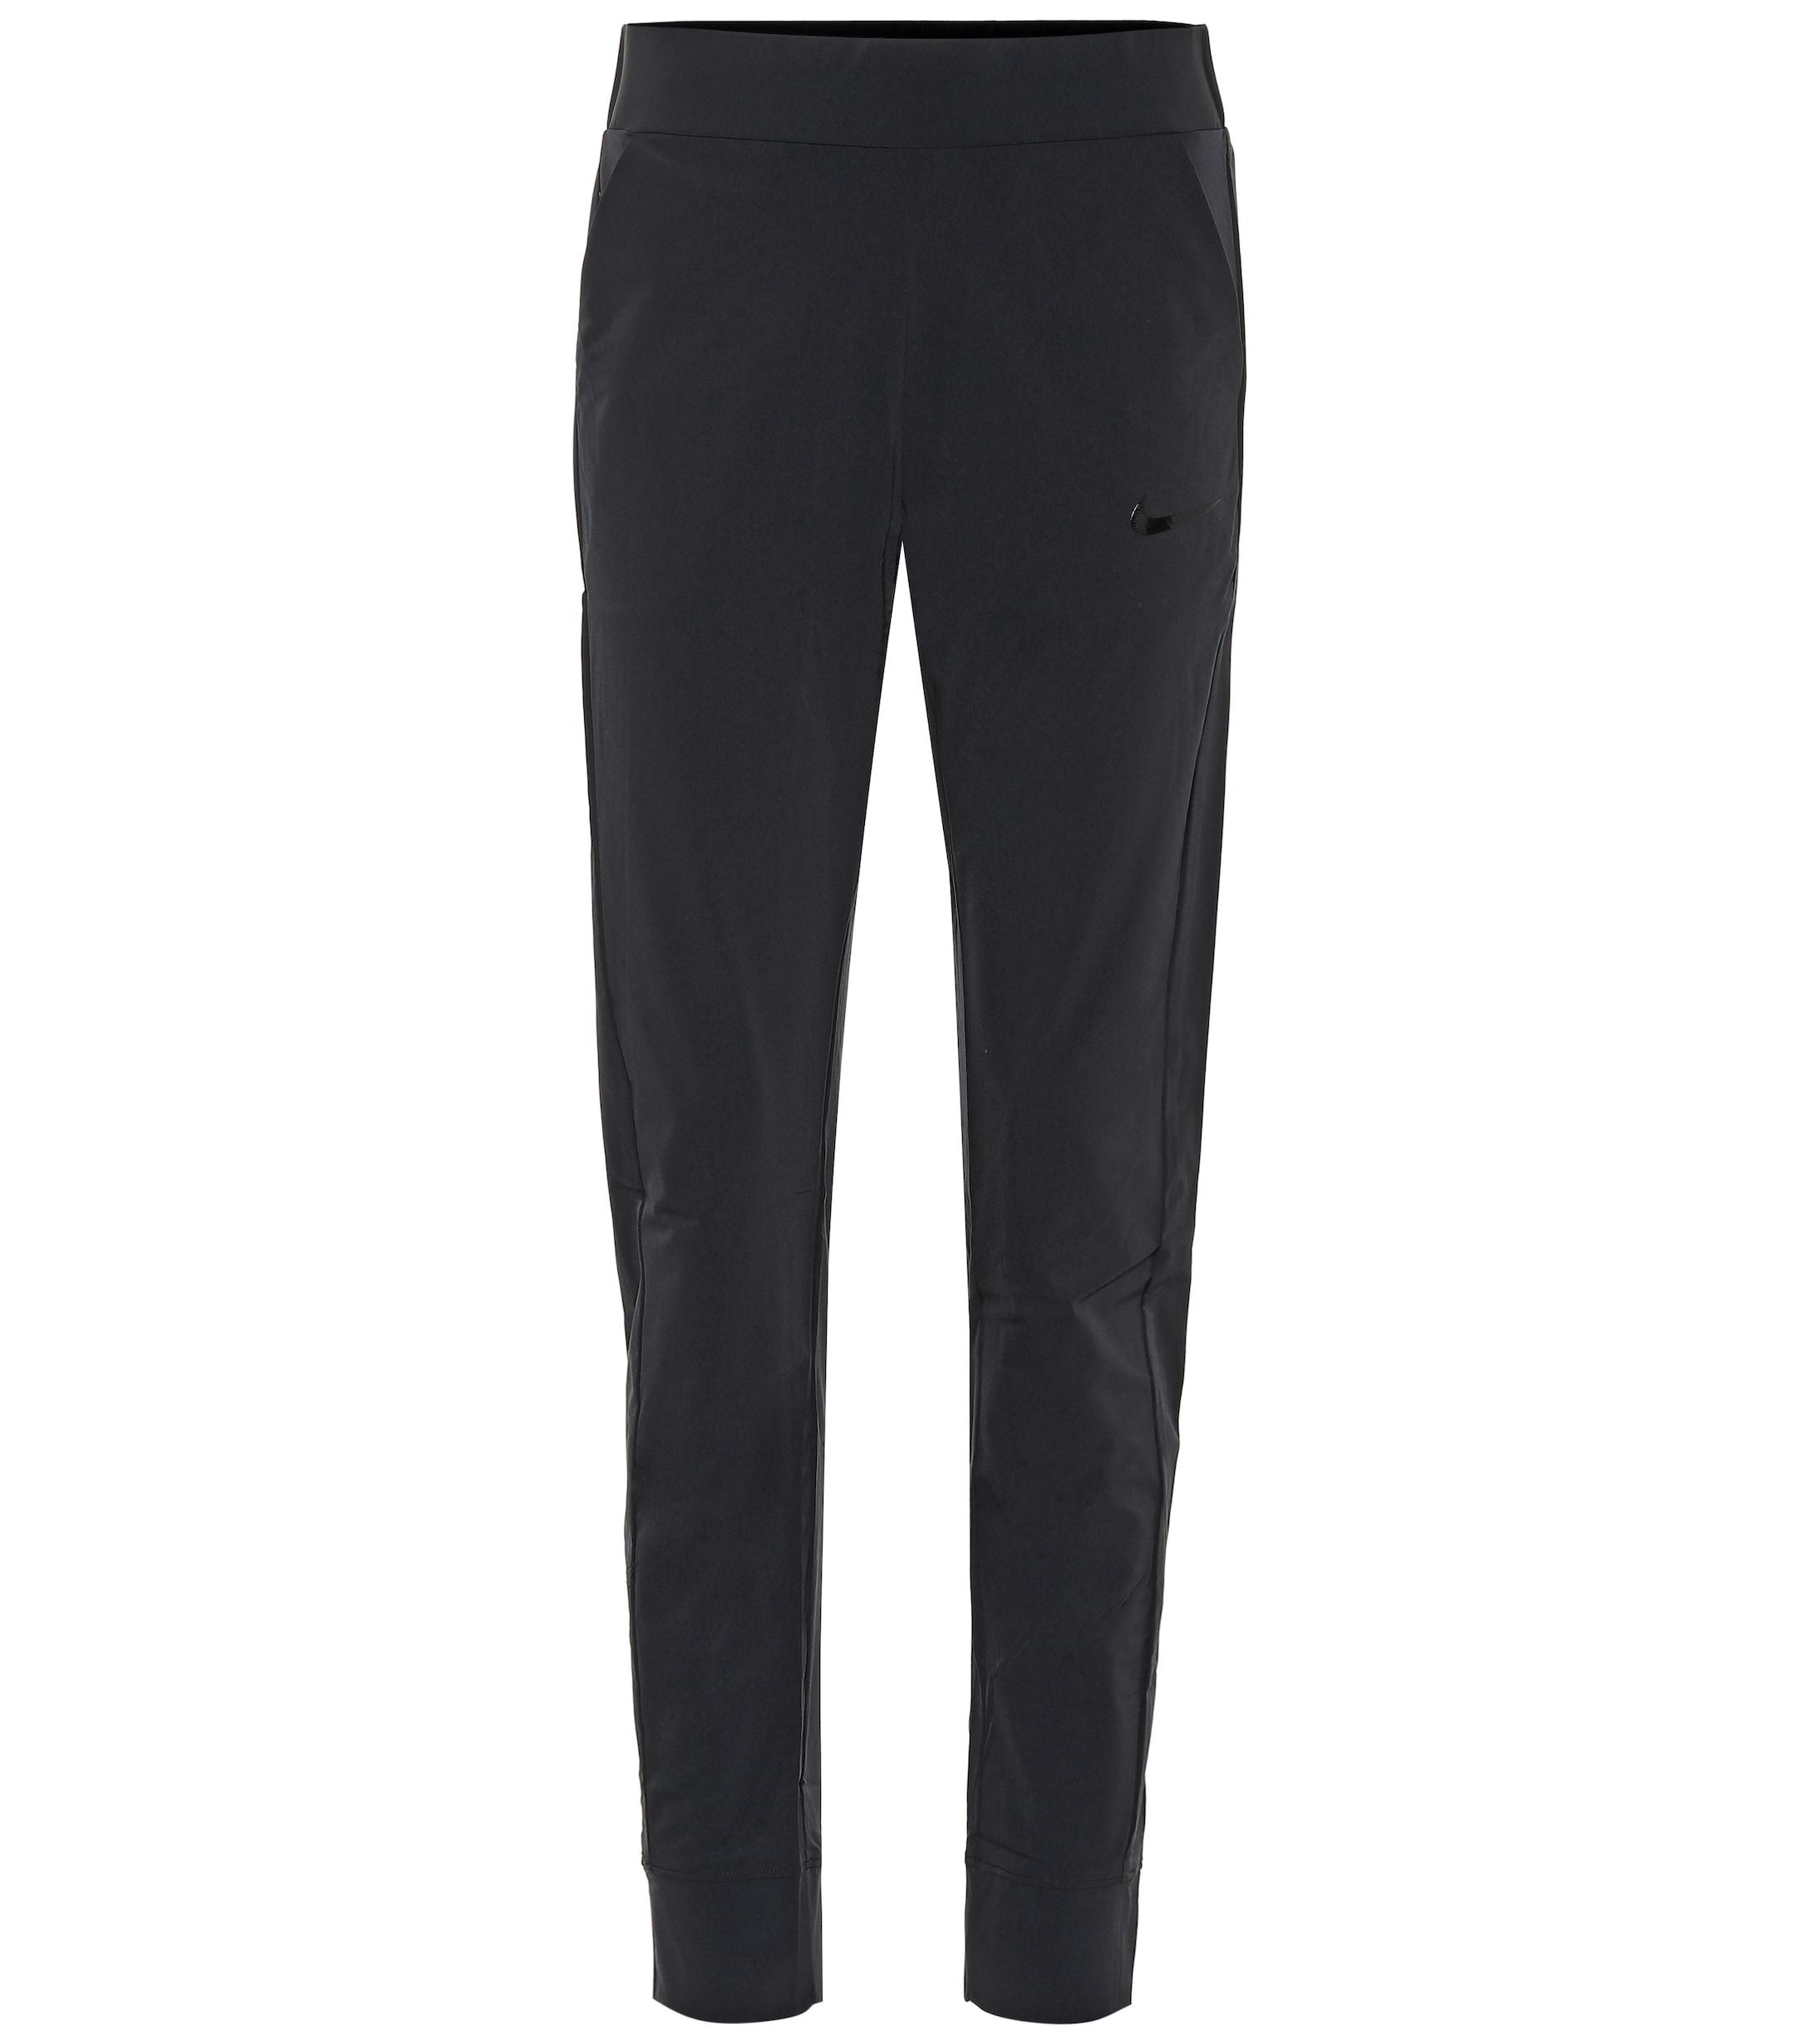 Nike Bliss Lux Mid-rise Training Pants in Black - Lyst